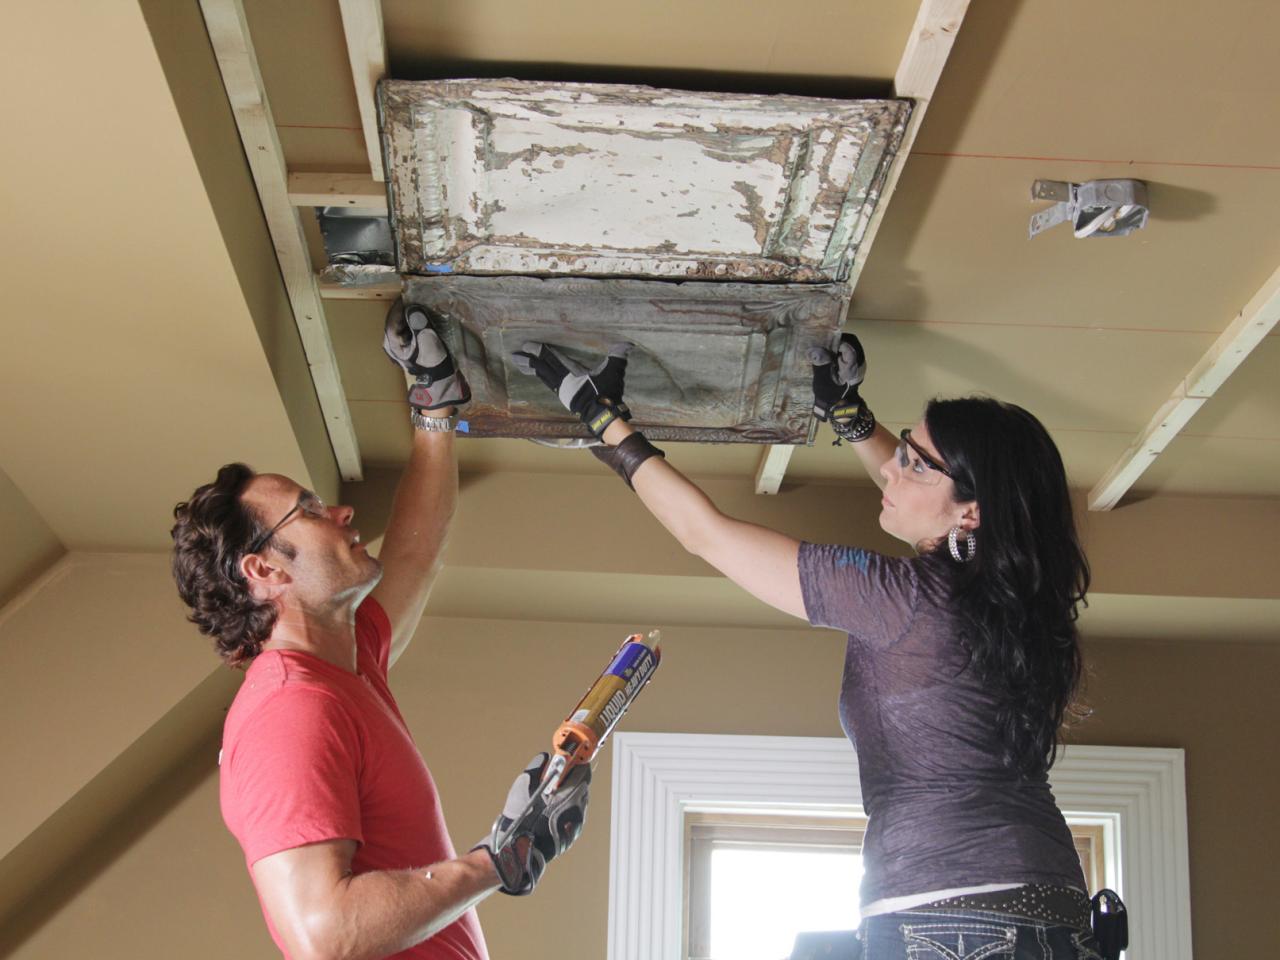 How To Install A Stamped Tin Ceiling, Tin Tile Ceiling Bathroom